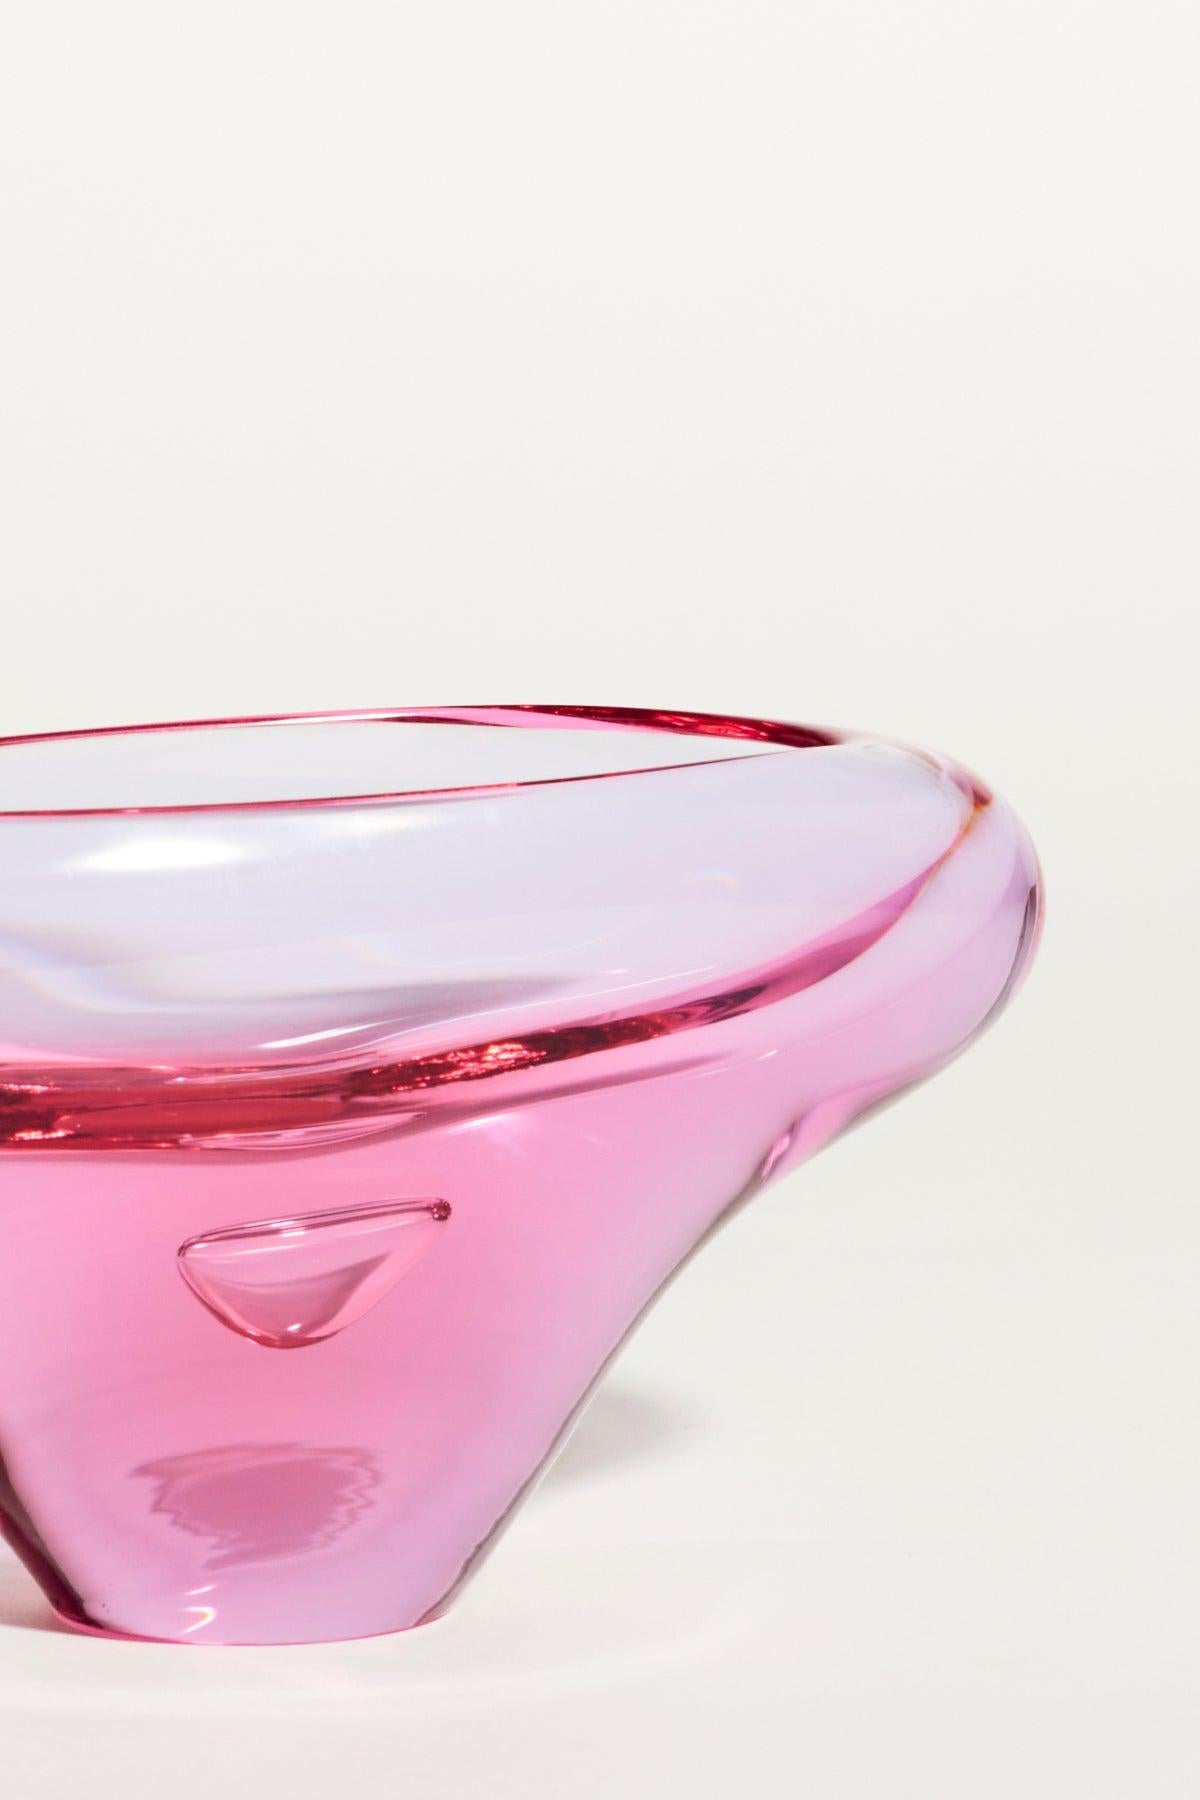 Mid-Century Modern Czech Pink and Lilac Rolled Edge Bowl